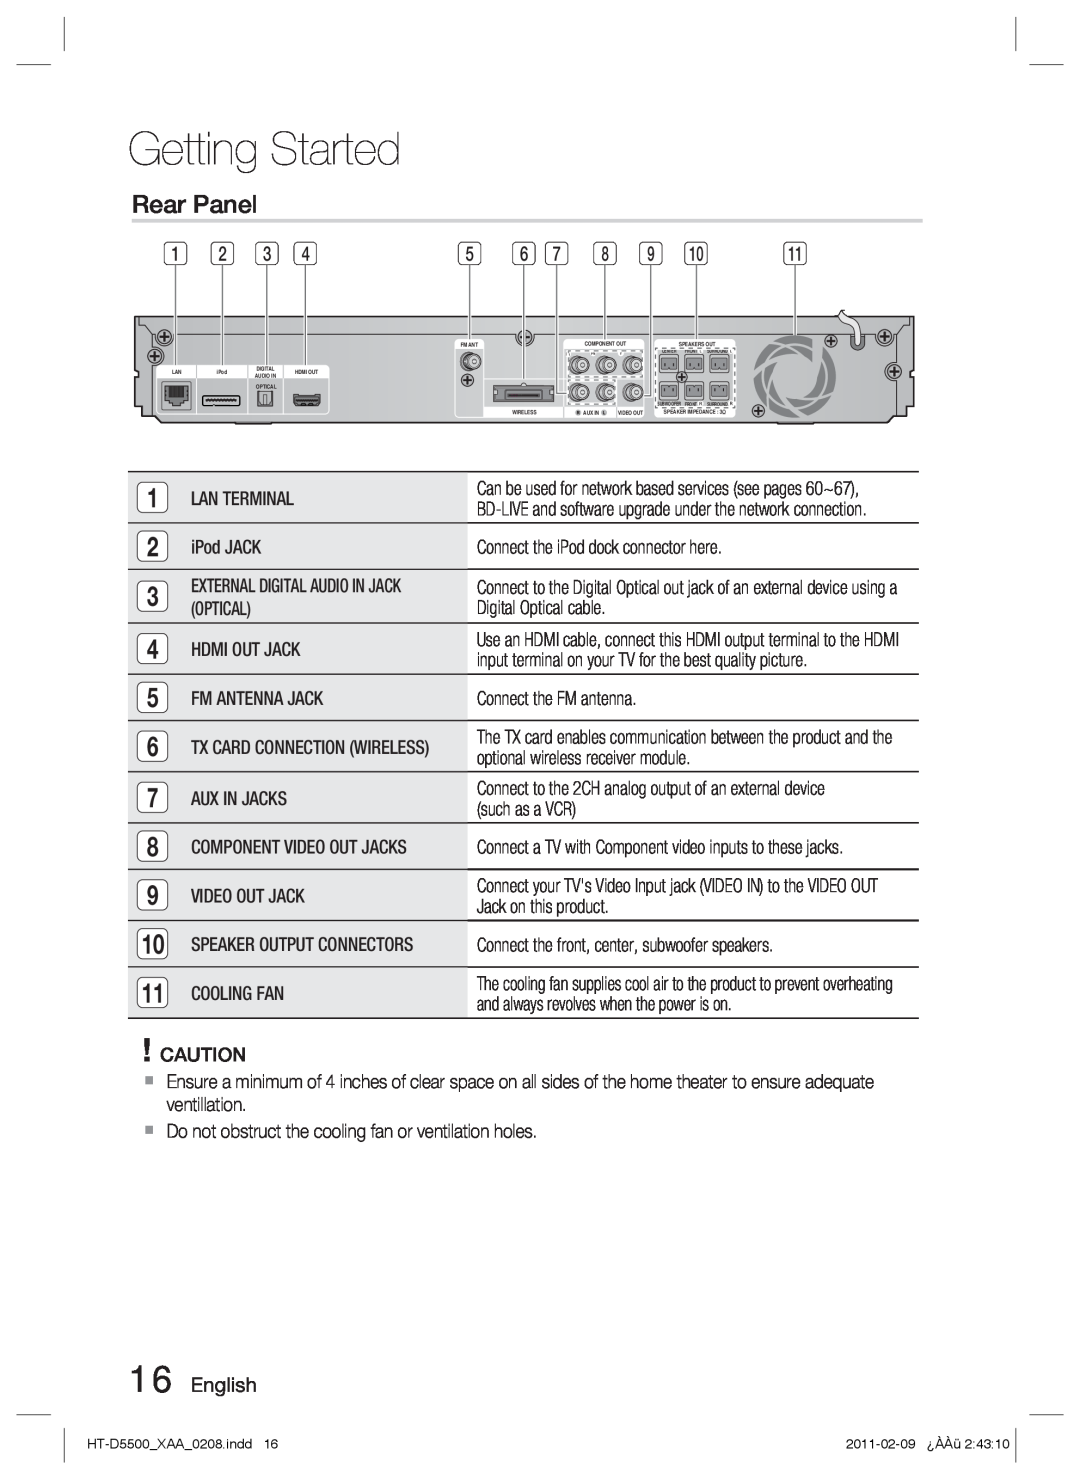 Samsung D5500 user manual Rear Panel, Getting Started 